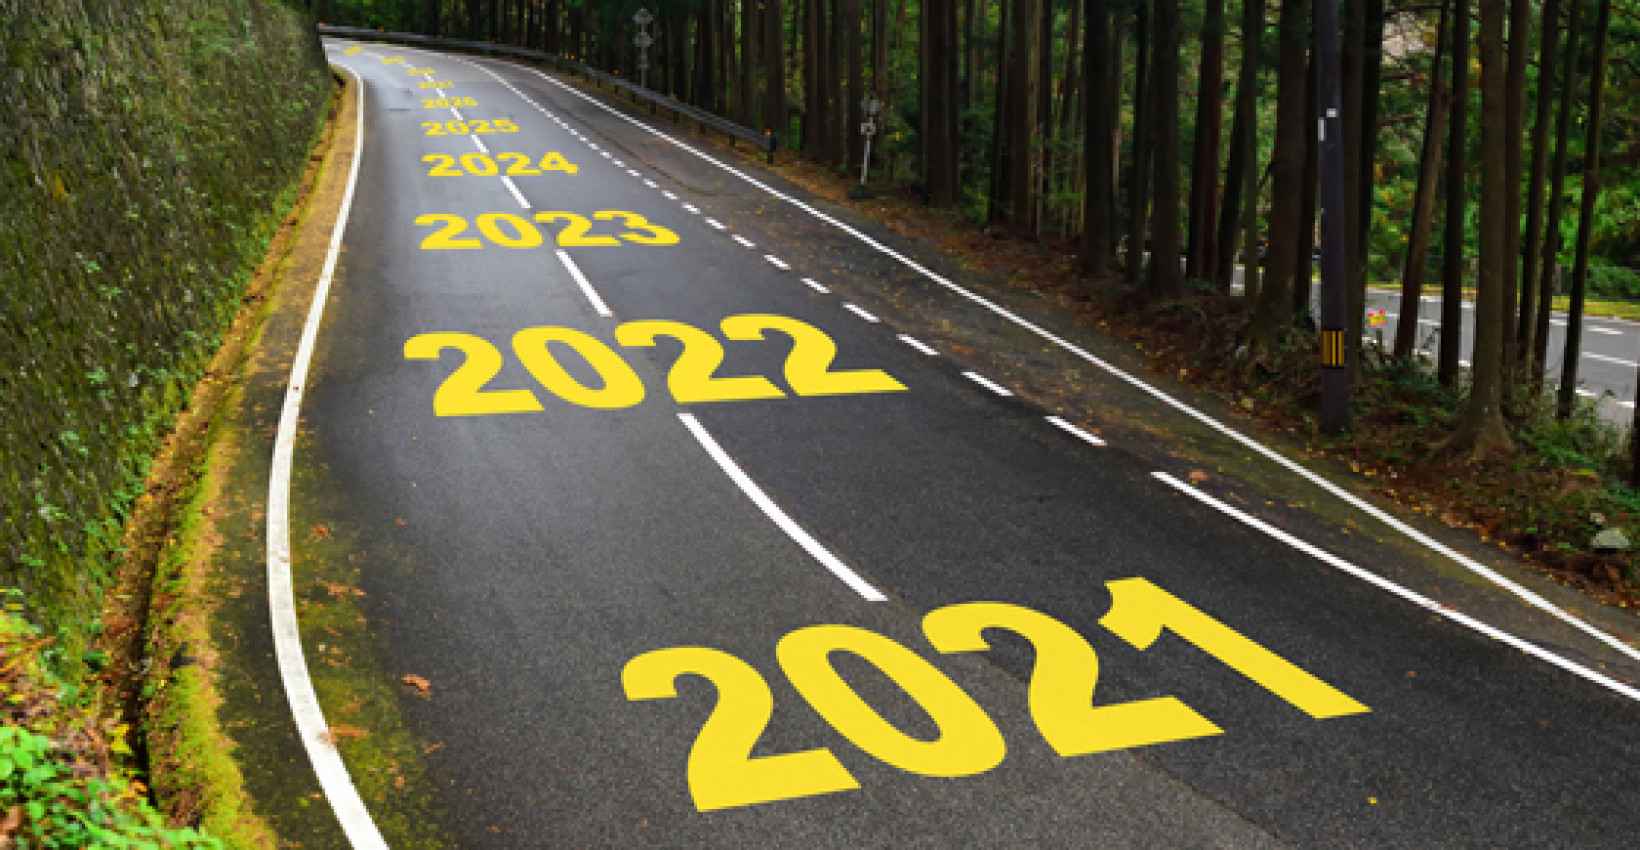 A road with increasing years painted in sequential order